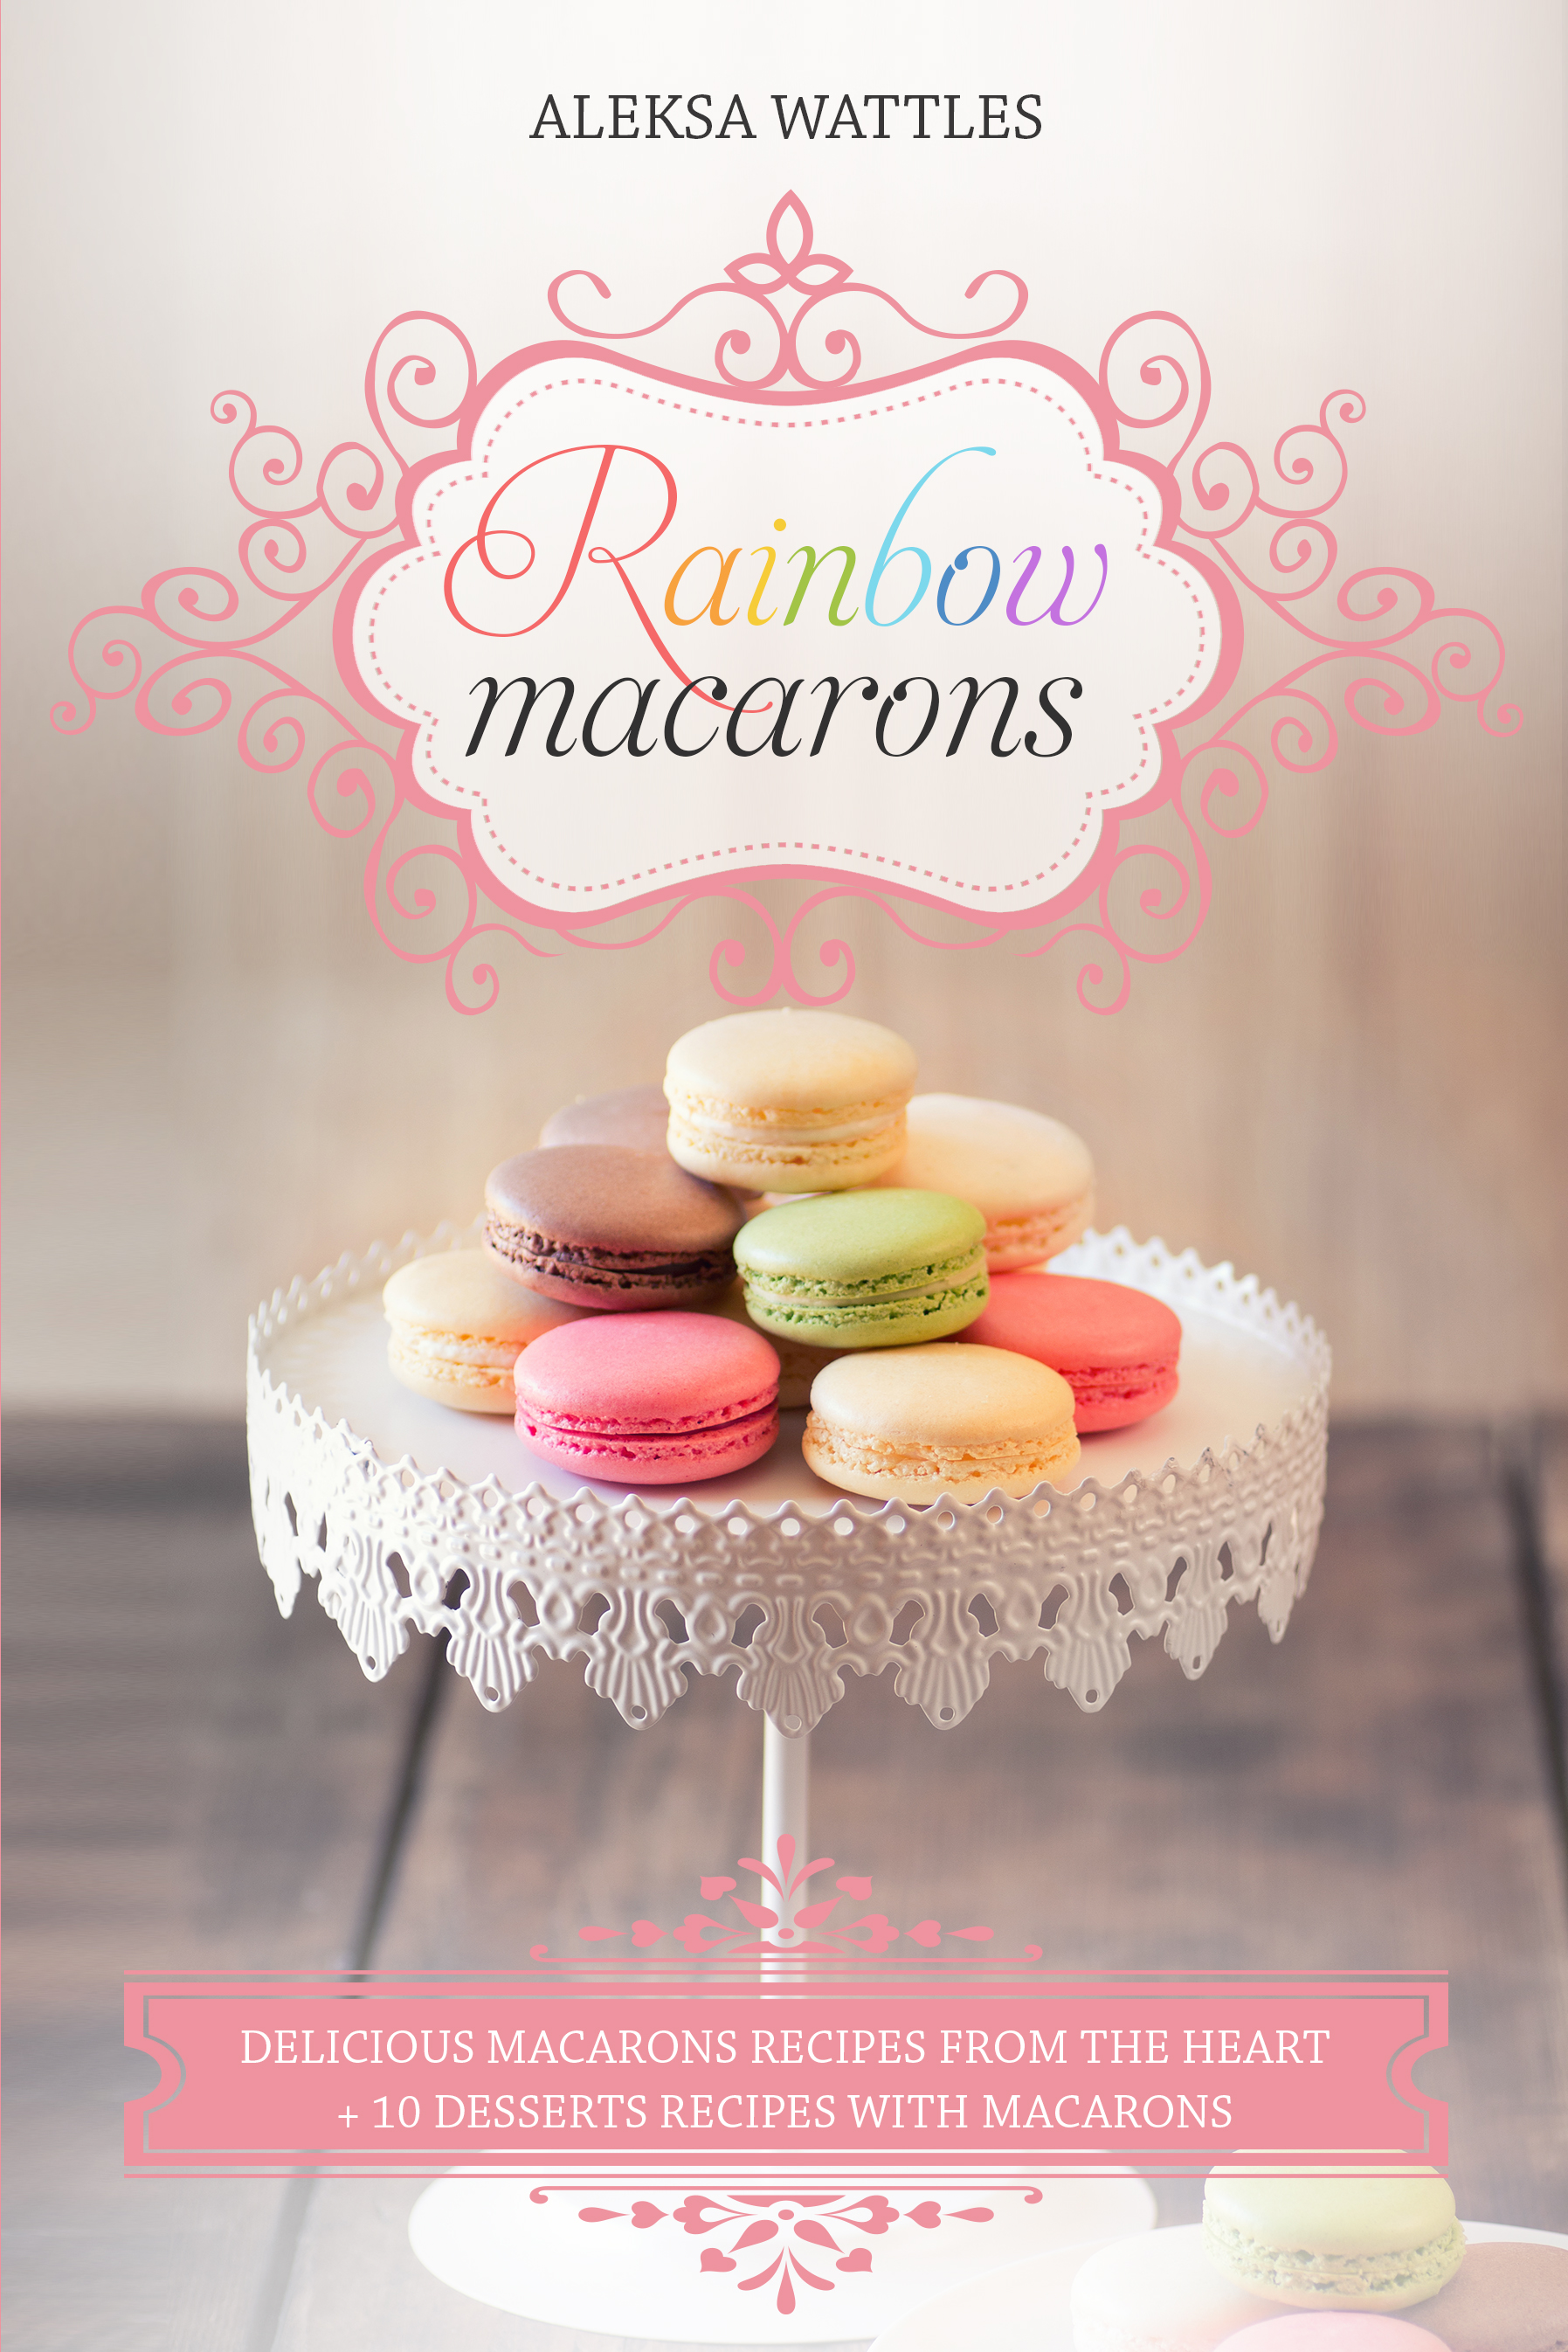 FREE: Rainbow Macarons: Delicious Macarons Recipes From the Heart + 10 Desserts Recipes with Macarons by Aleksa Wattles